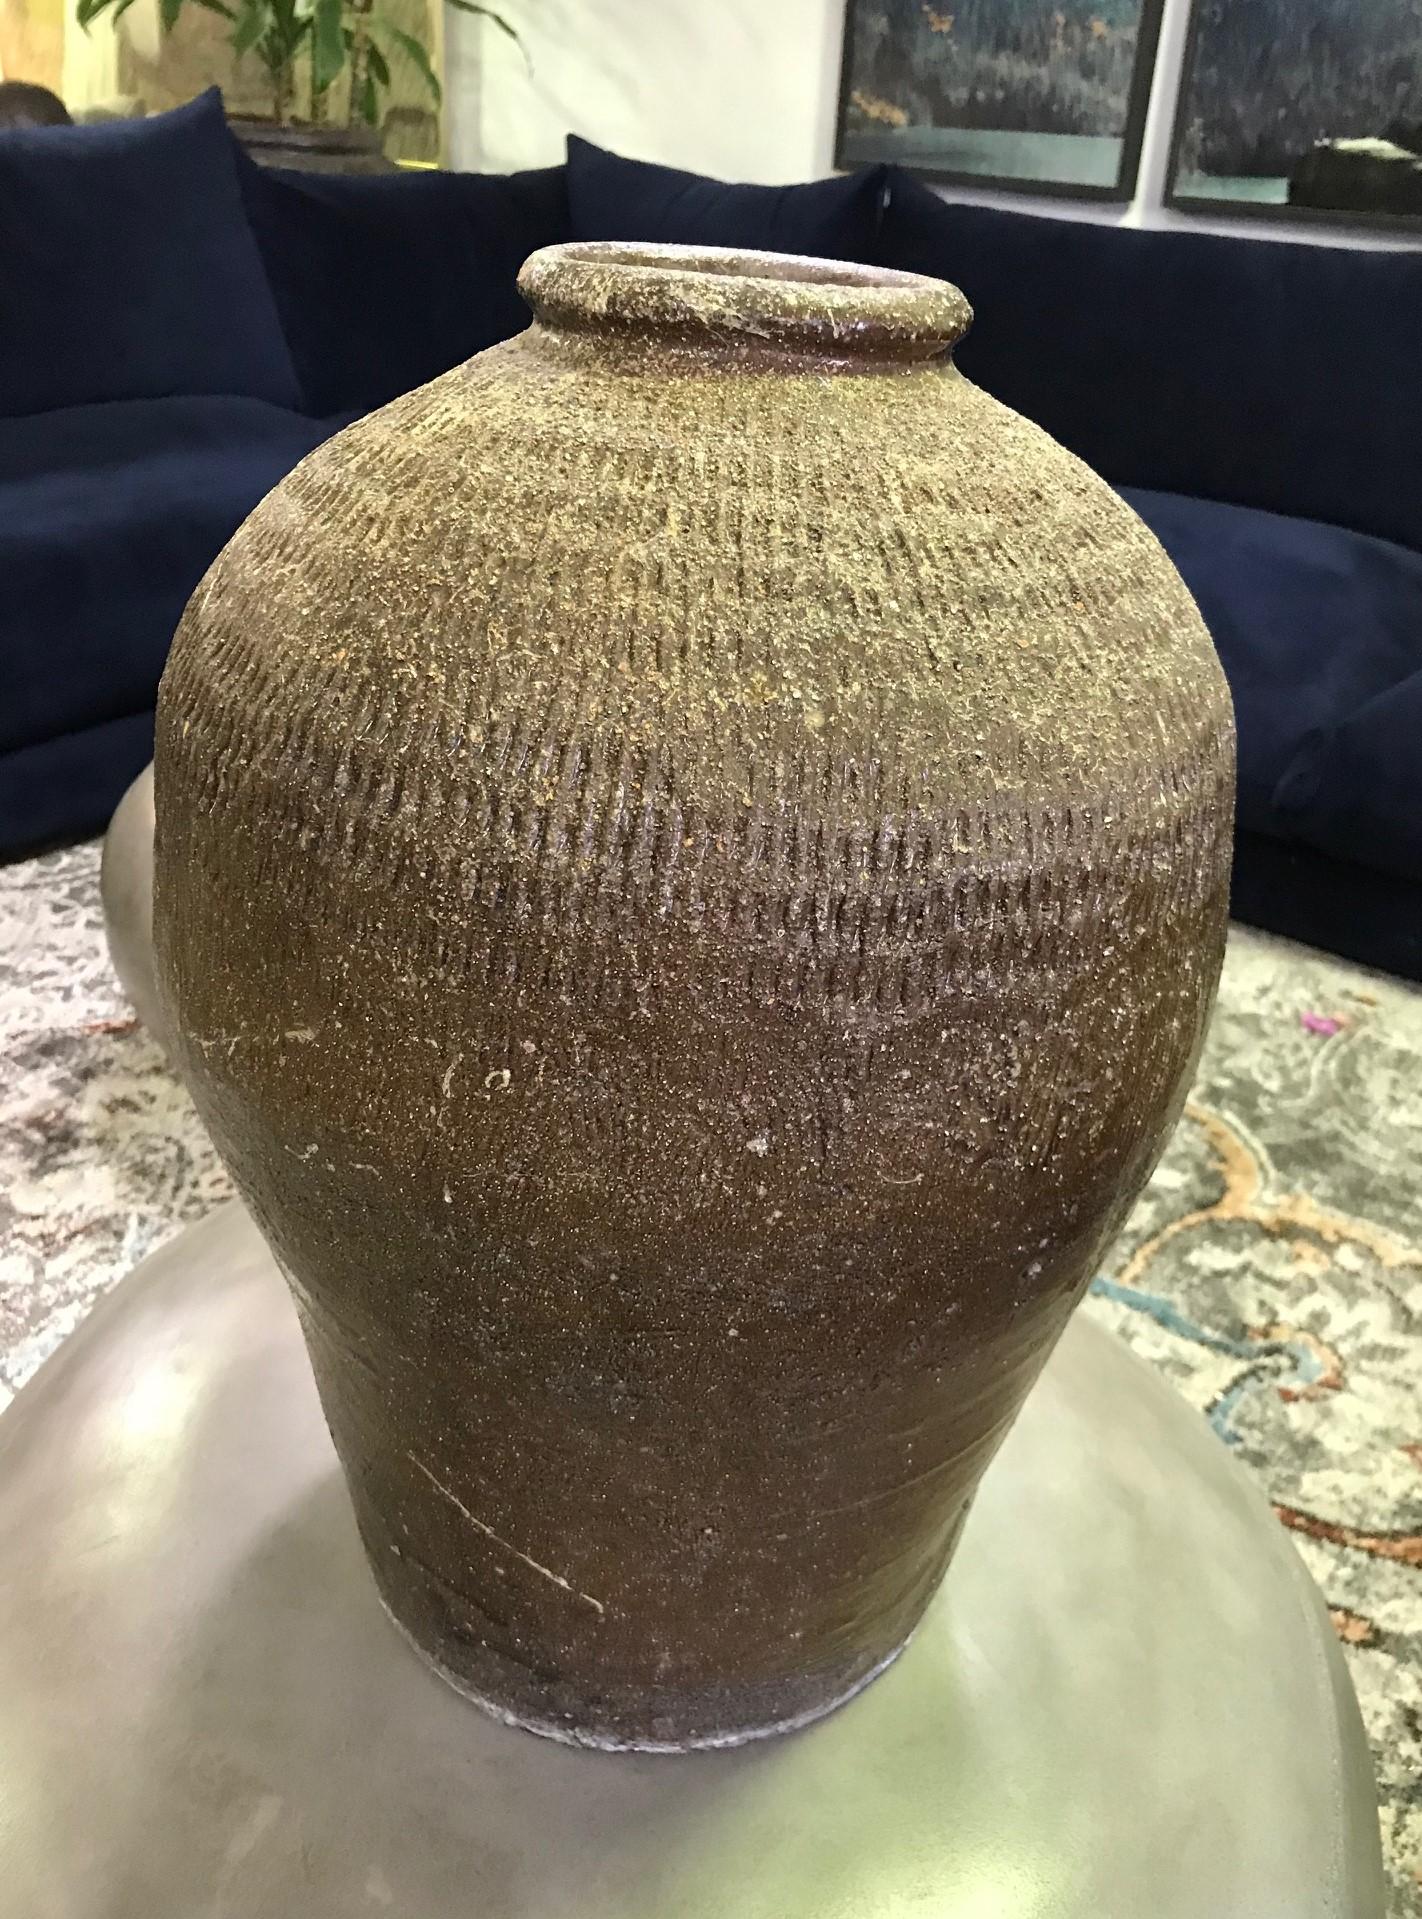 A truly wonderfully made and textured, darkly colored large earthenware vase/jar.

From a group of three vases (please see photos) we acquired from a high-end Southern California estate.

Would clearly stand out in about any setting indoors or